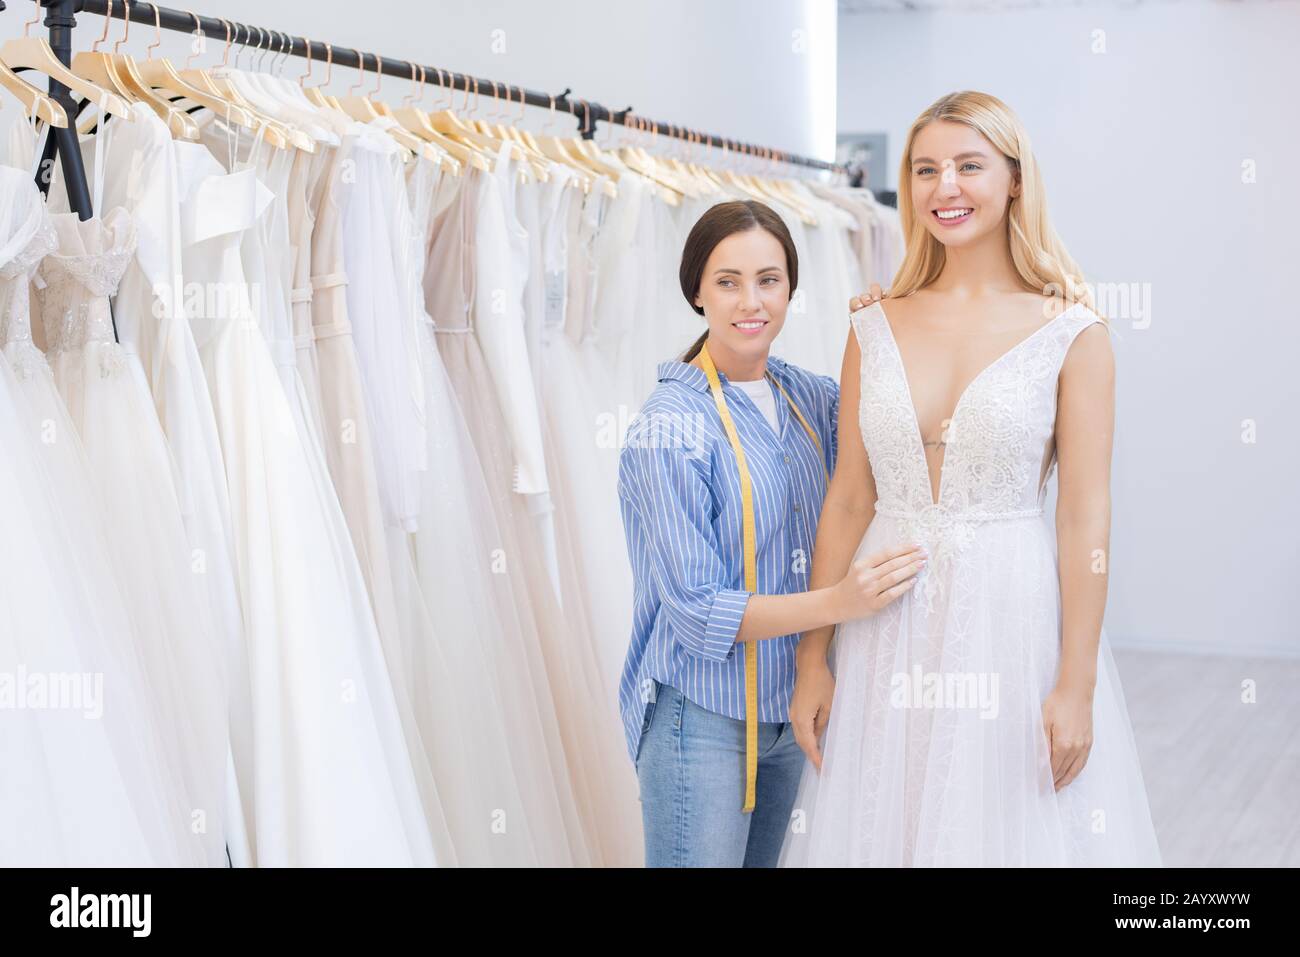 Attractive Young Woman Trying On Wedding Dress In Modern Bridal Shop Sales Assistant Helping 4570